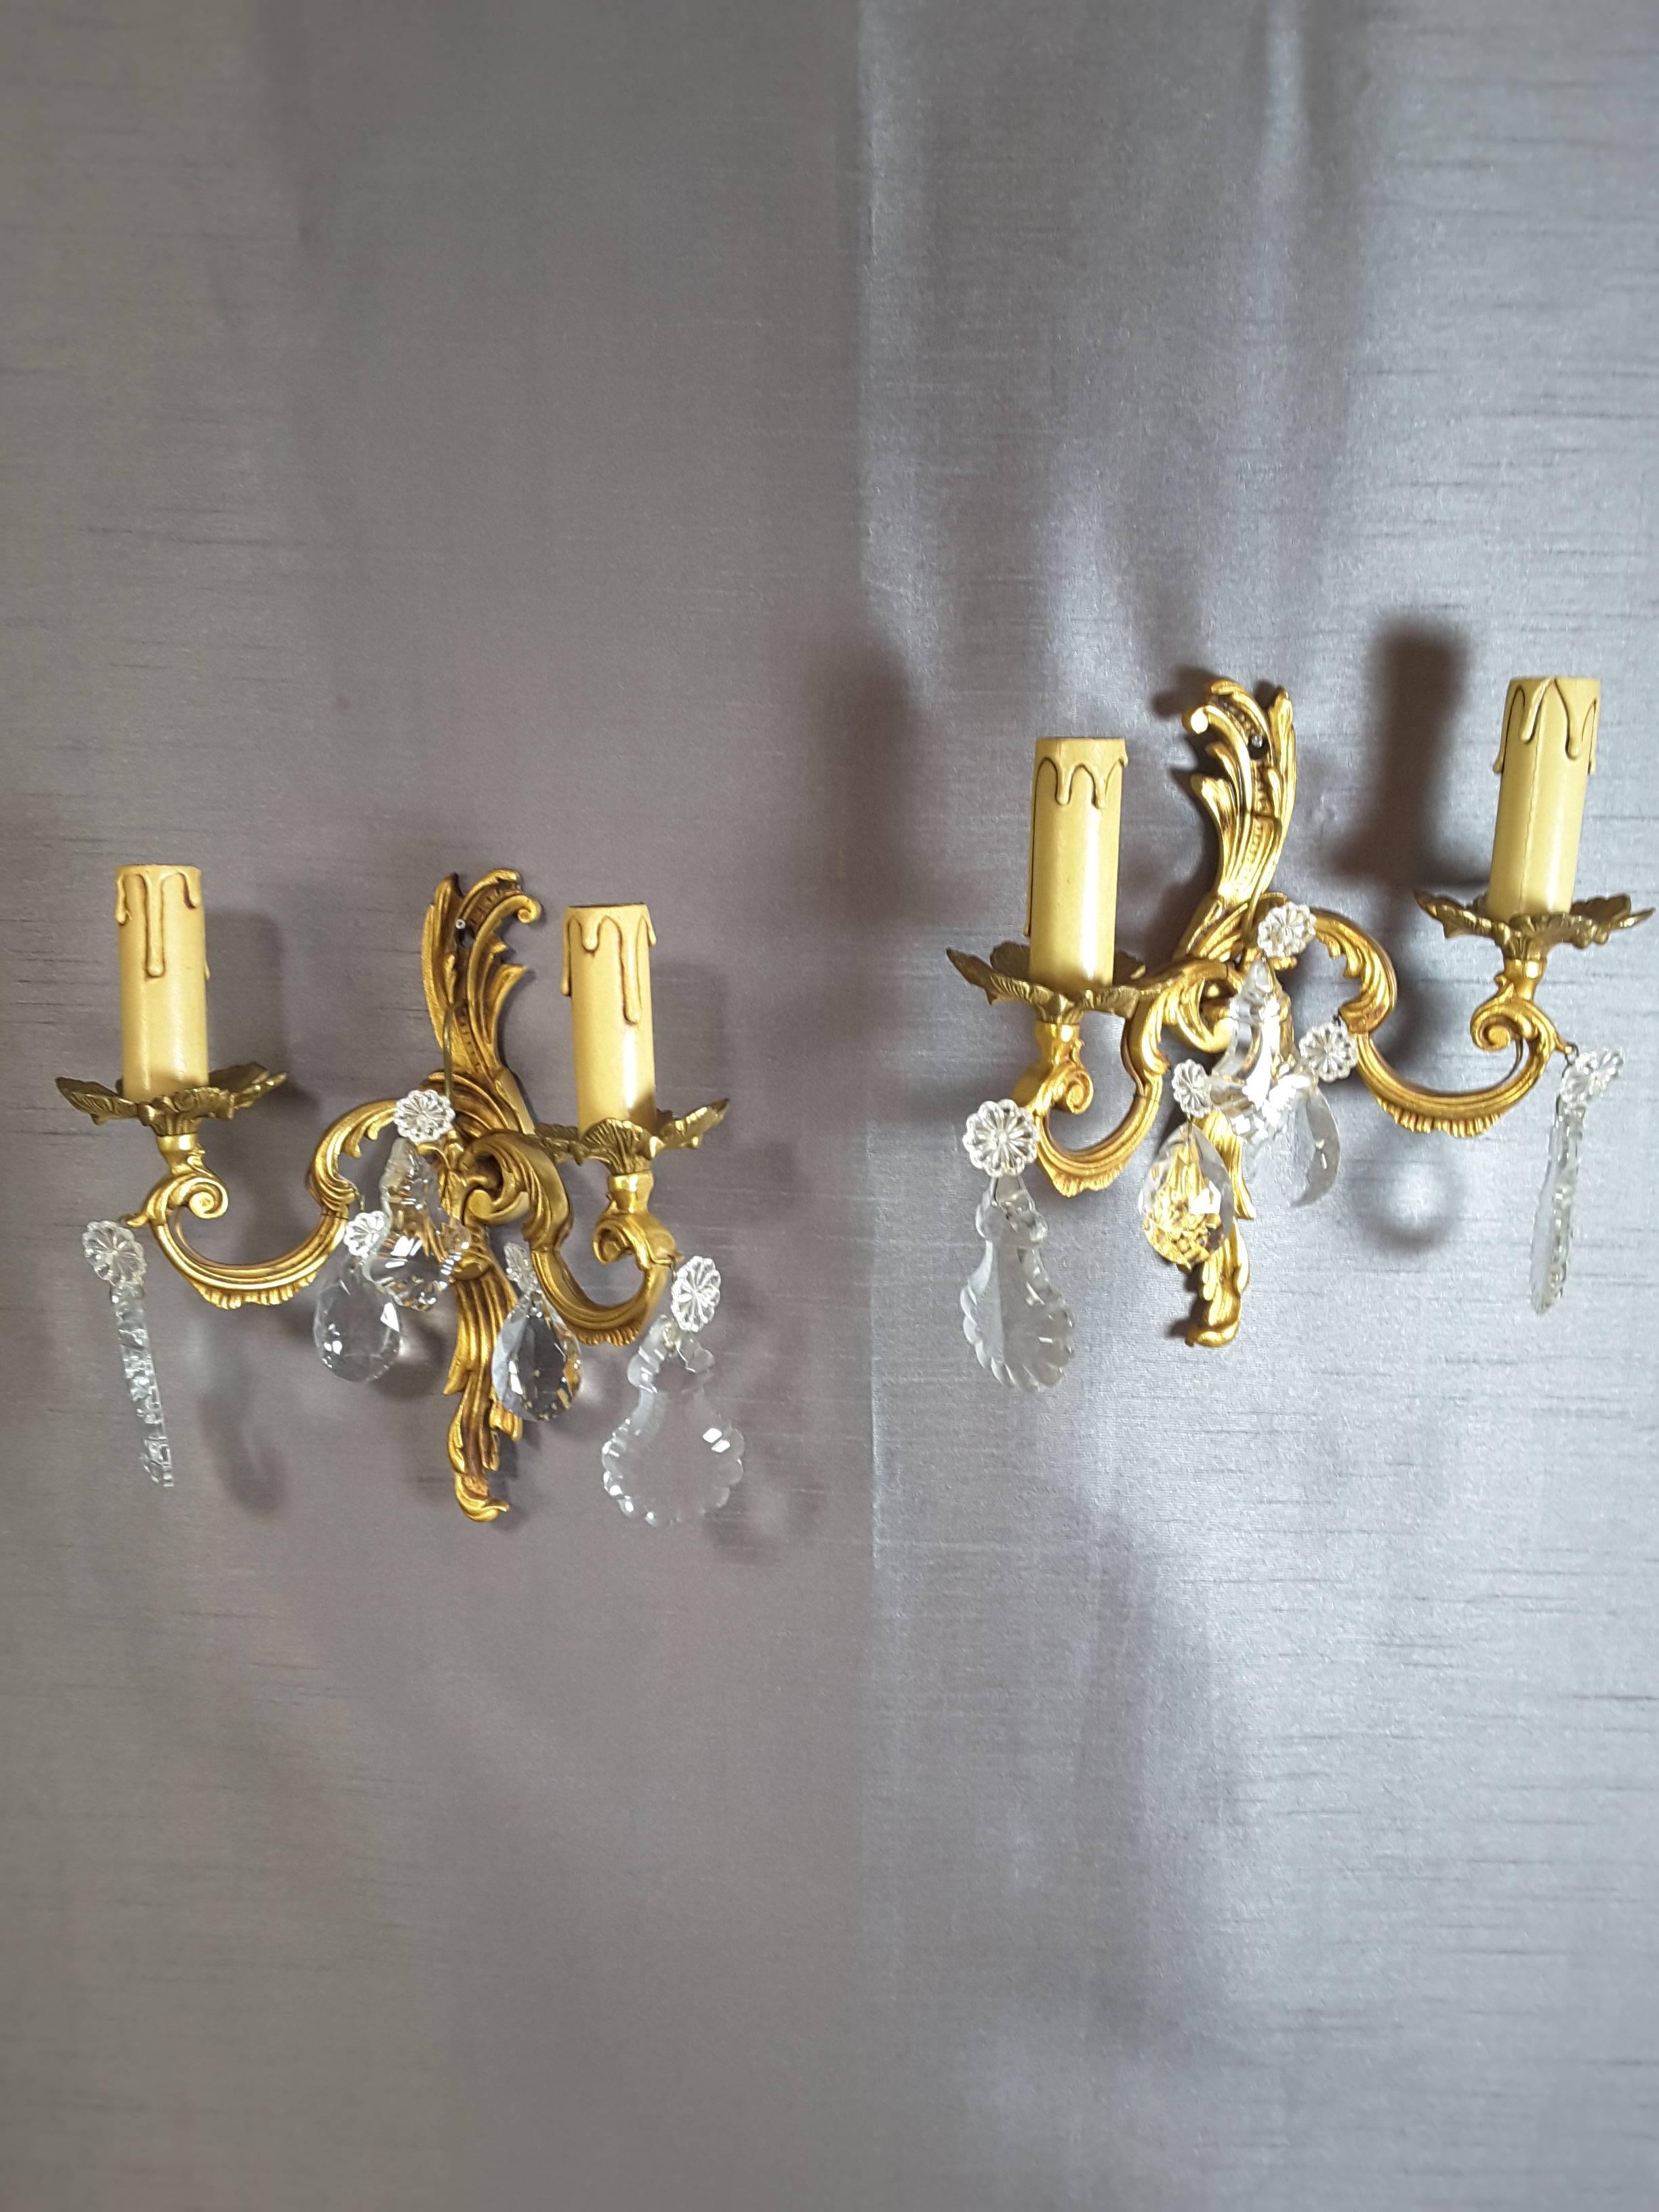 Pair of brass/gilt wall sconces with floral crystals, the sconces are done in a foliate style with an 